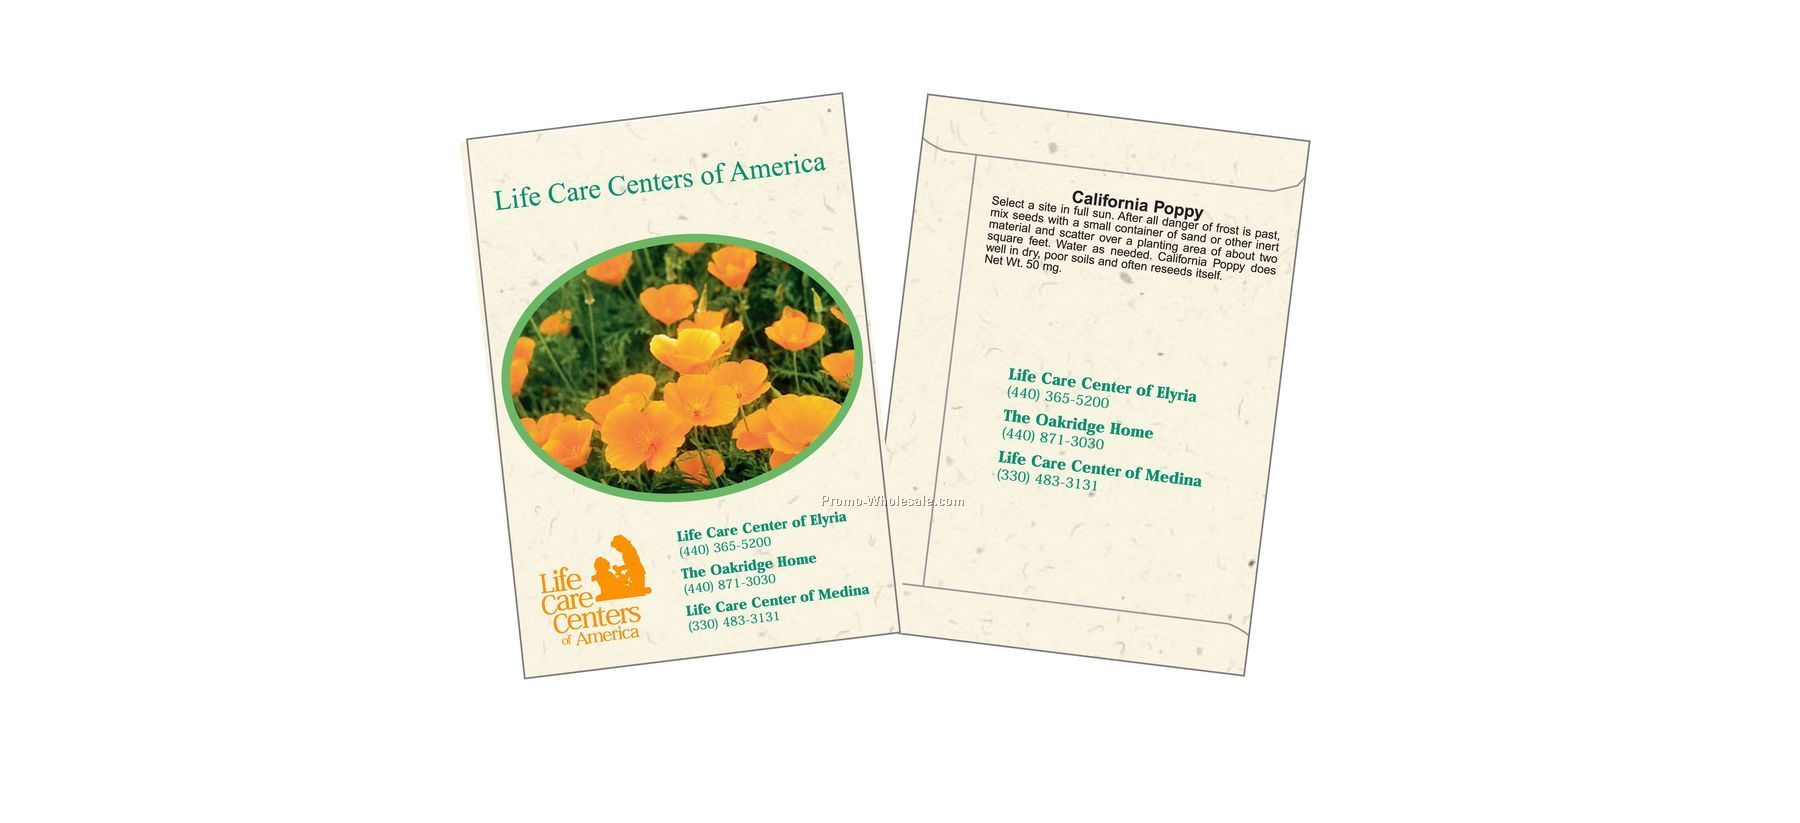 3-1/4"x4-1/2" California Poppy Flower Seed Packet (2 Color)